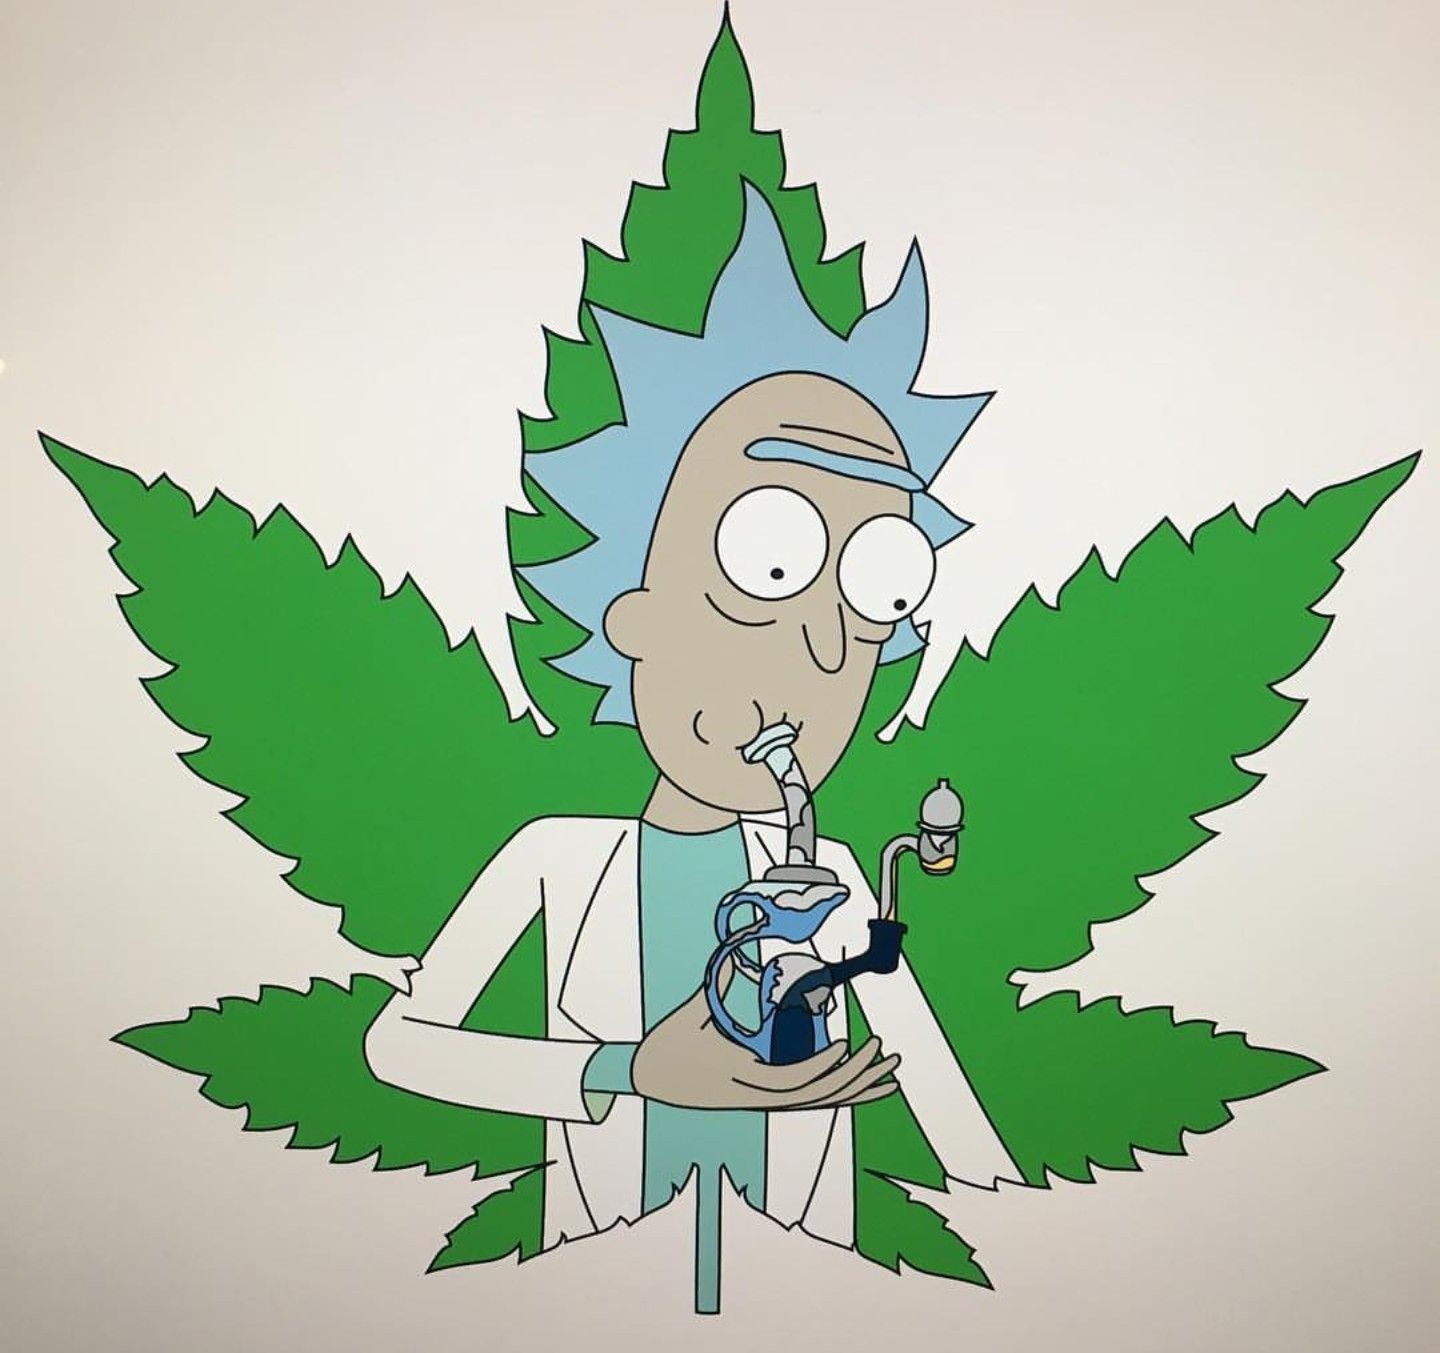 Weed Wallpaper Lovely Rick And Morty Of Weed Wallpaper - Rick And Morty Canna - HD Wallpaper 